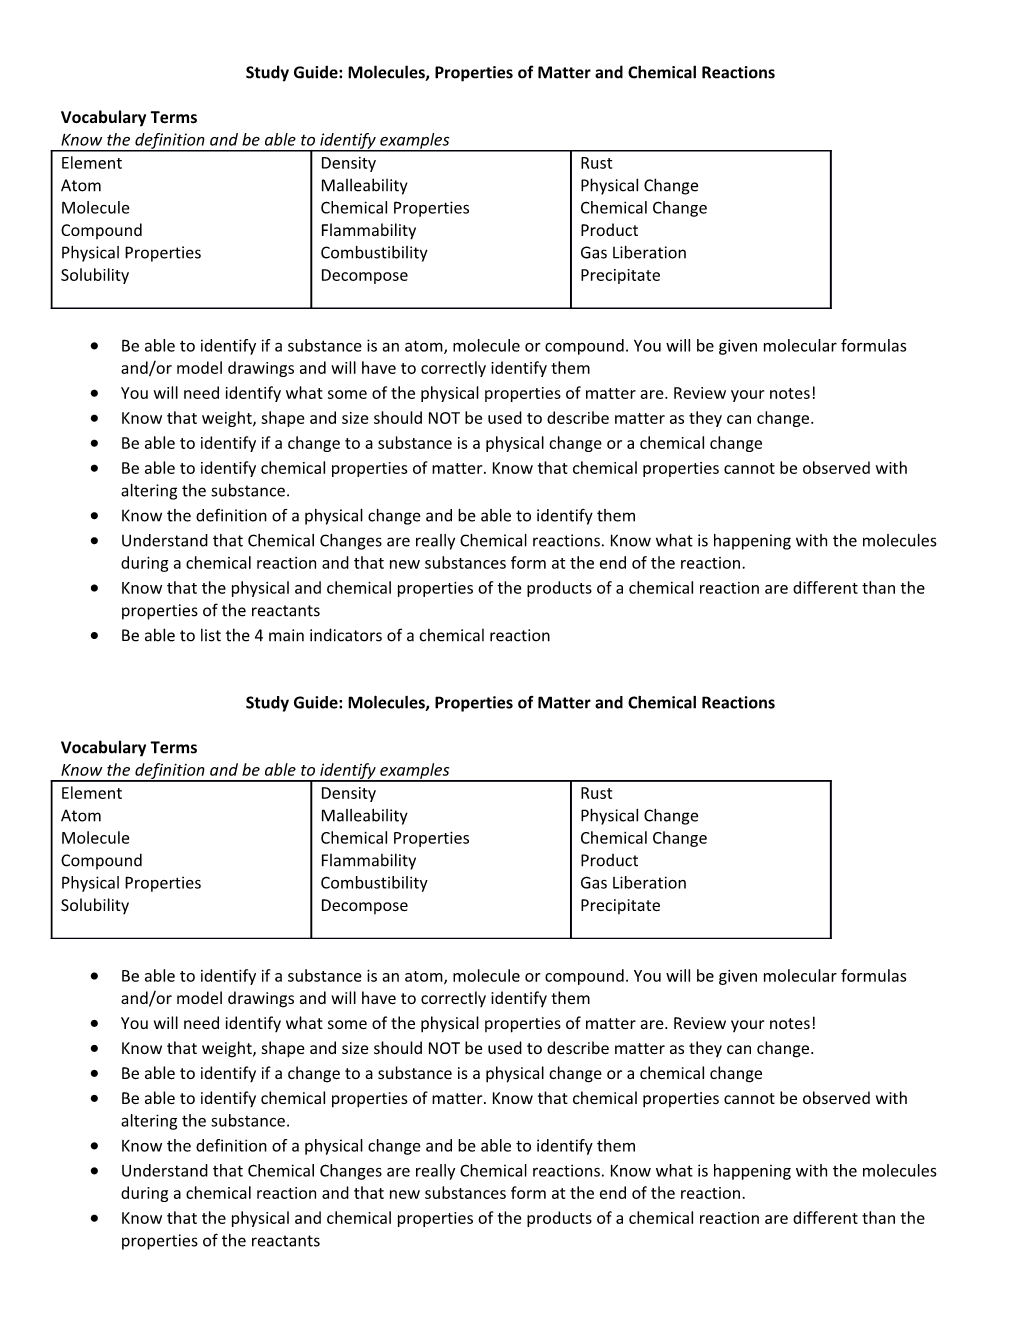 Study Guide: Molecules, Properties of Matter and Chemical Reactions